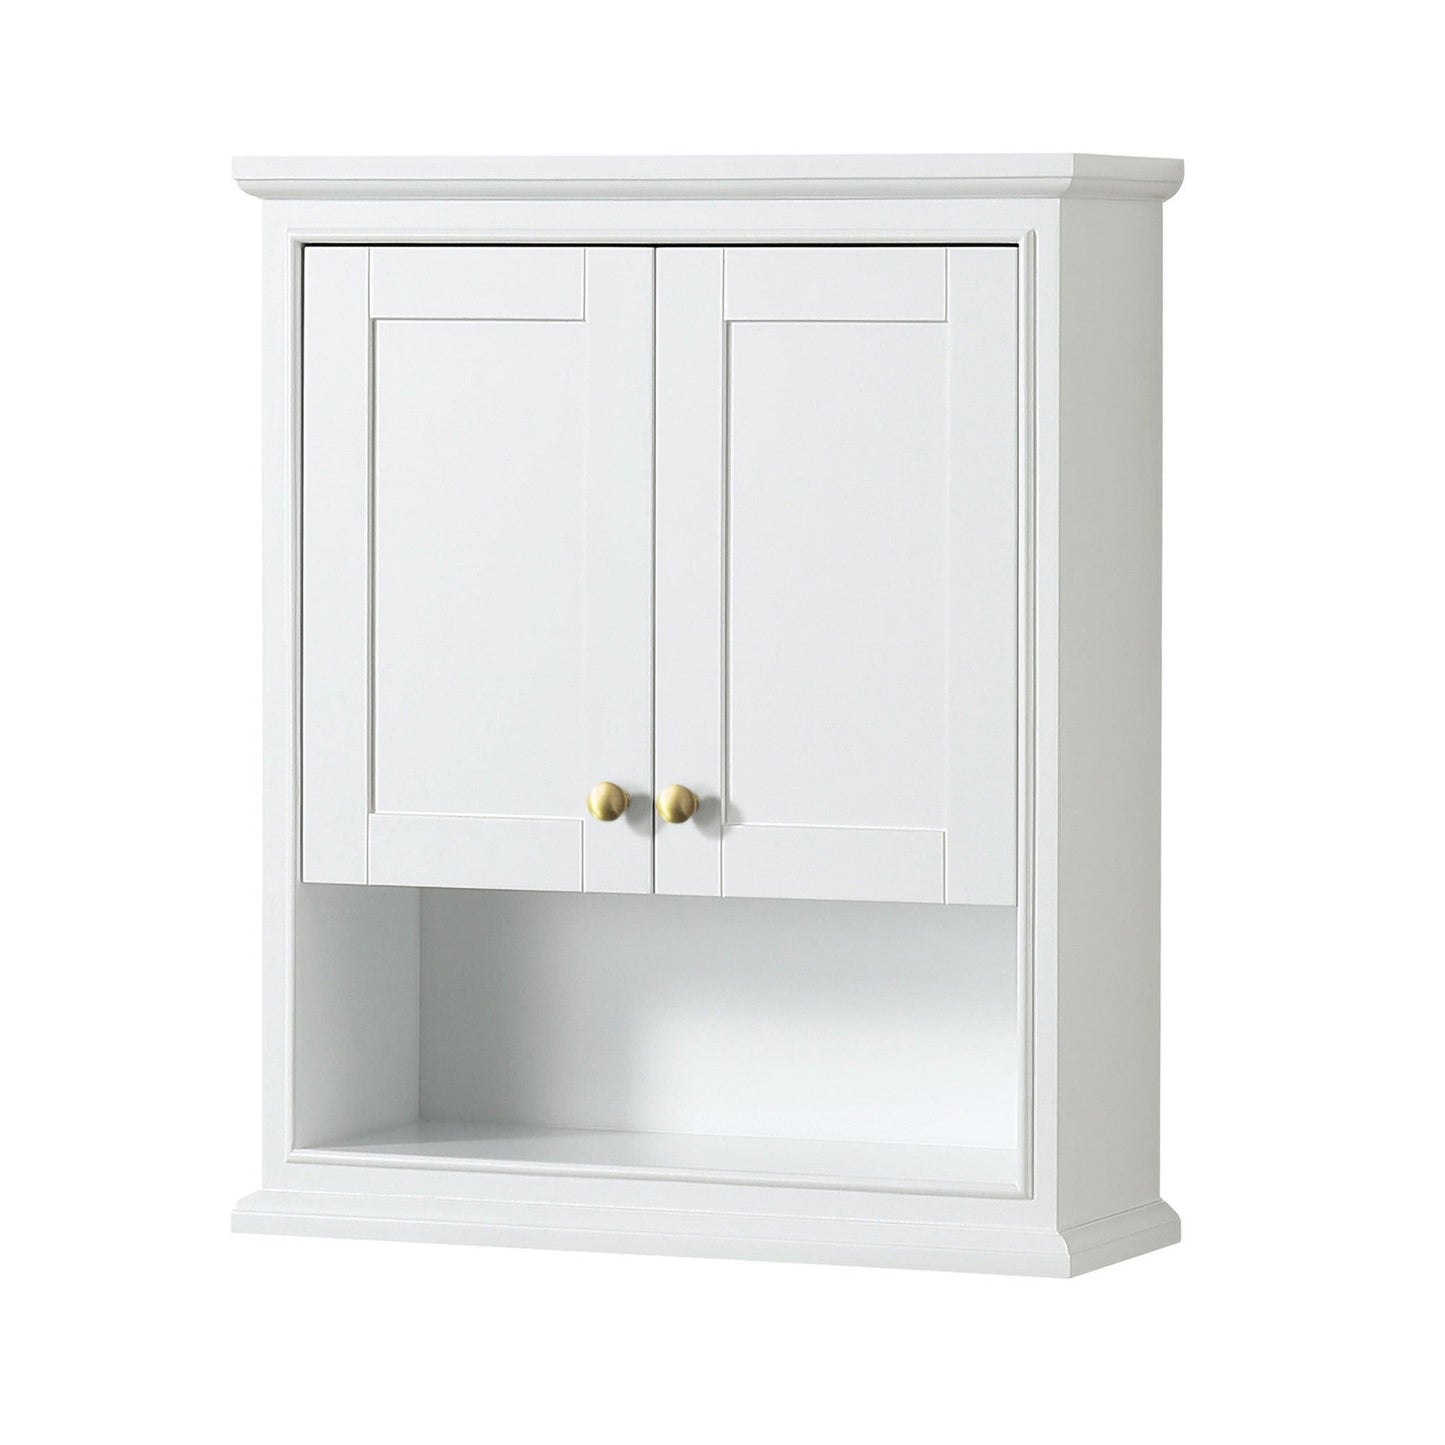 Deborah 25" Over-the-Toilet Bathroom Wall-Mounted Storage Cabinet in White With Brushed Gold Trim